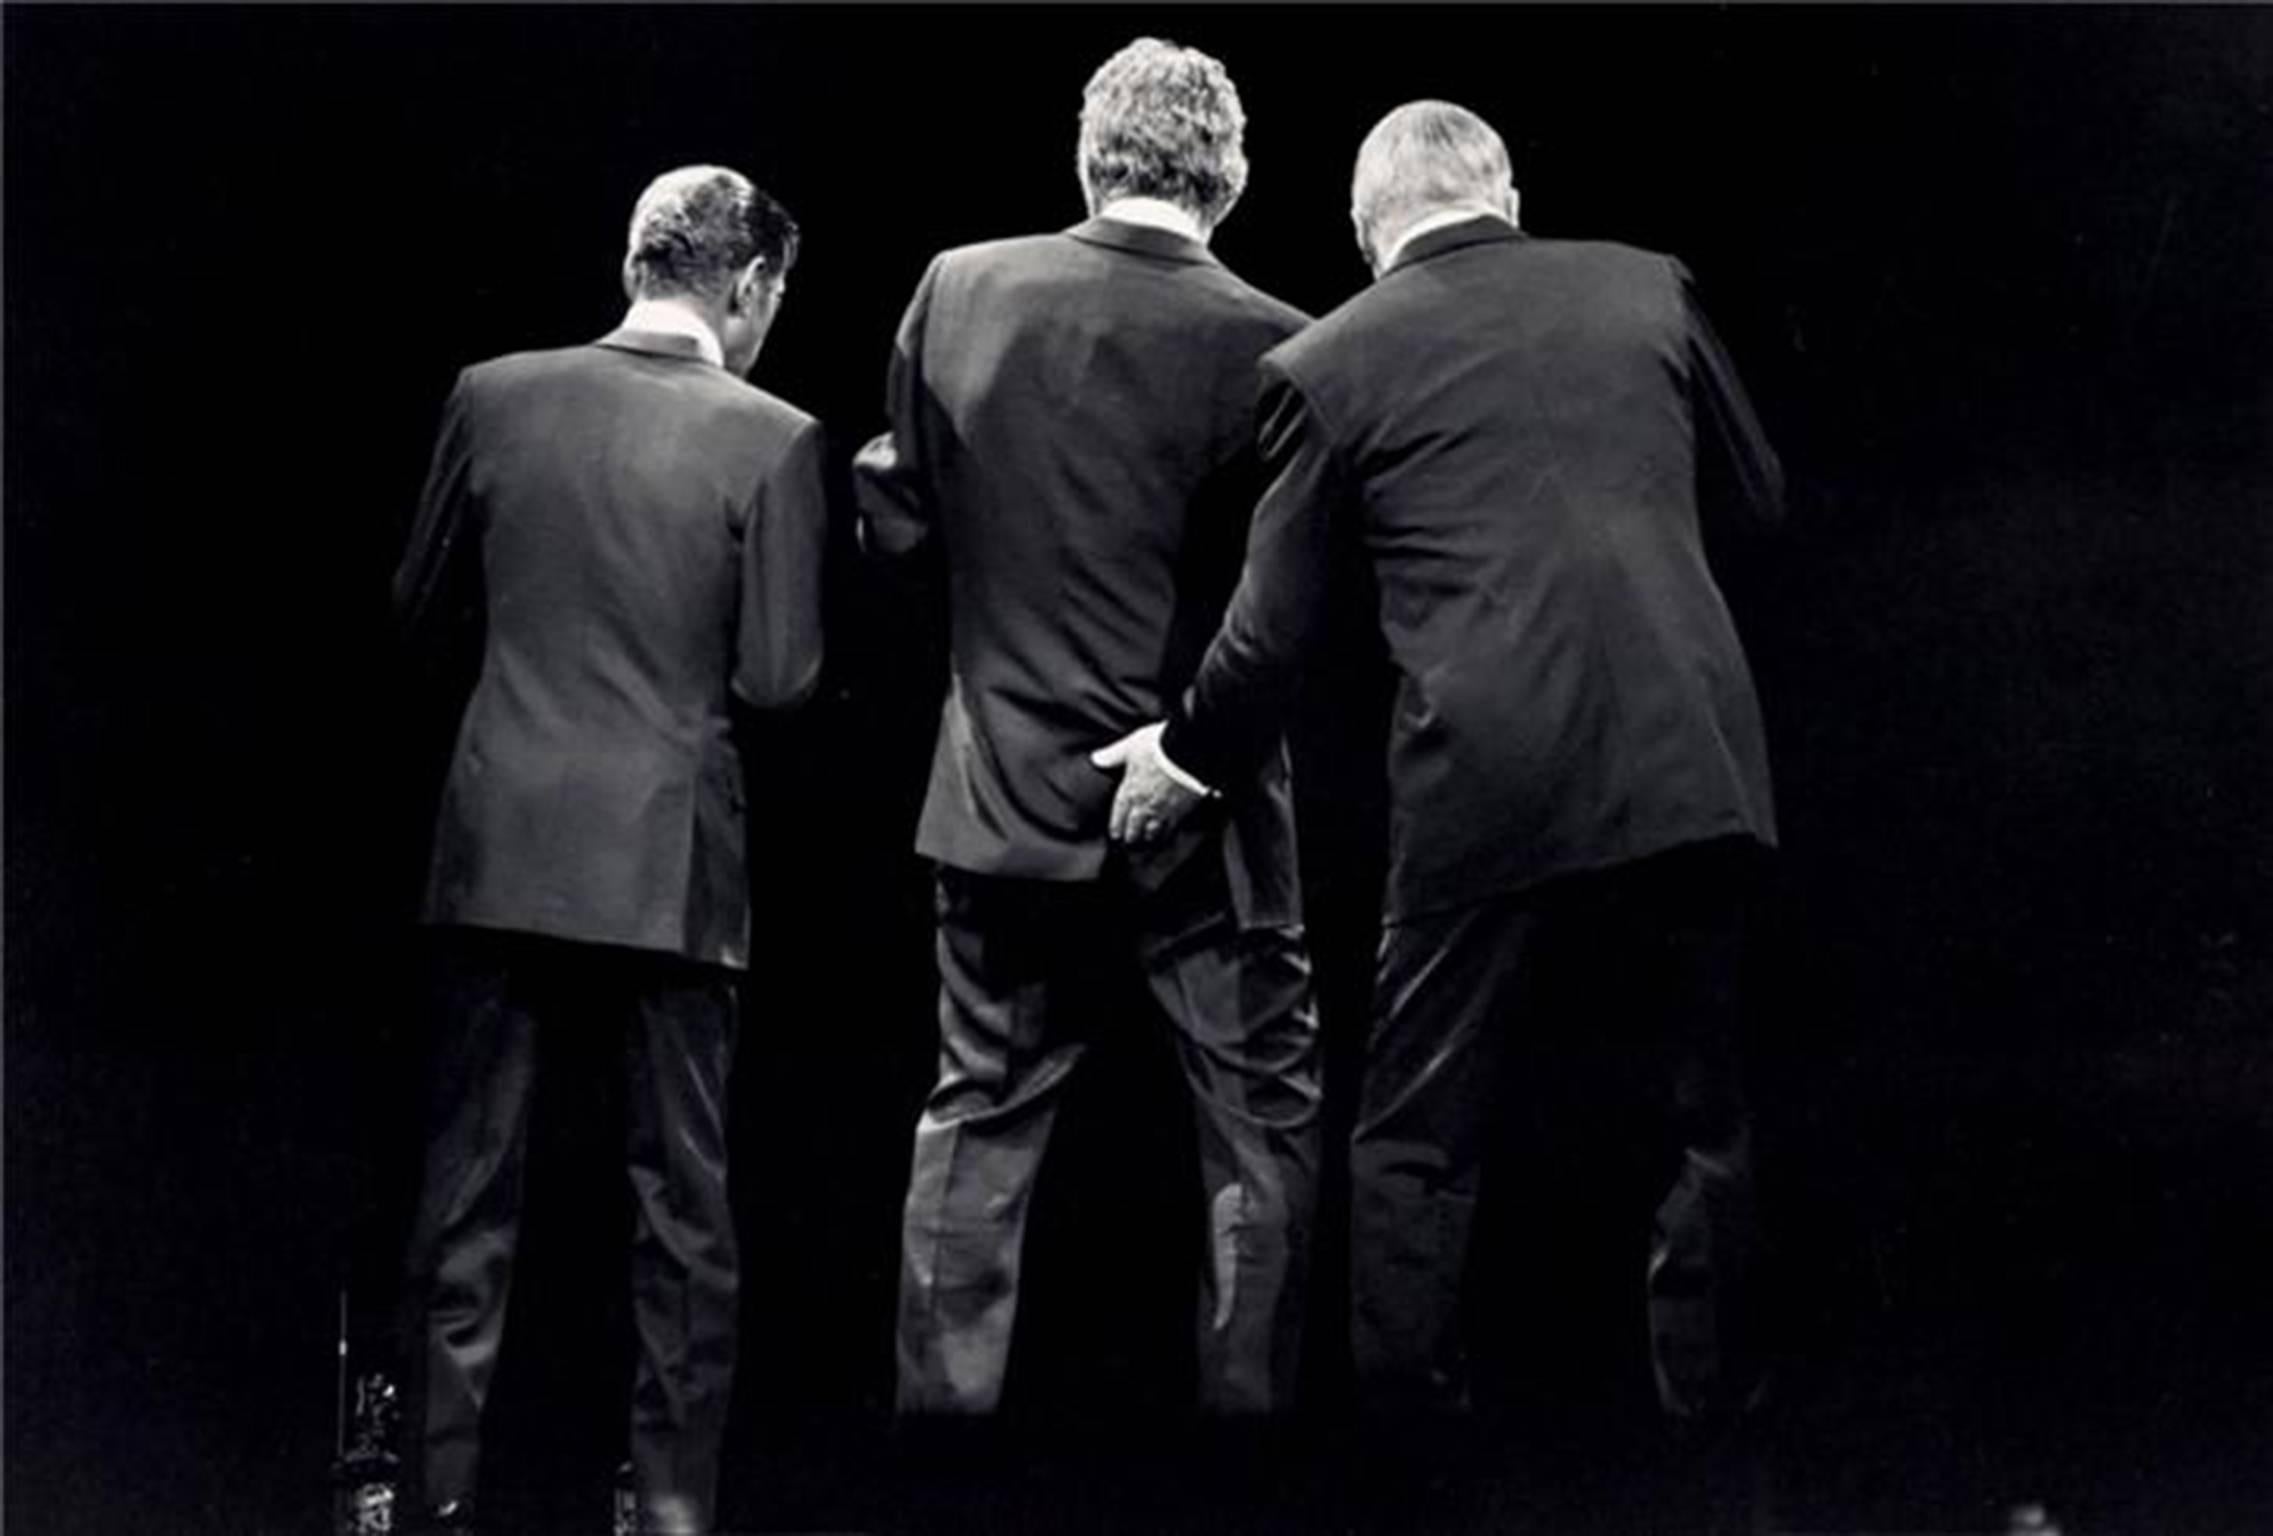 Neal Preston Black and White Photograph - The Rat Pack, Oakland, CA 1988